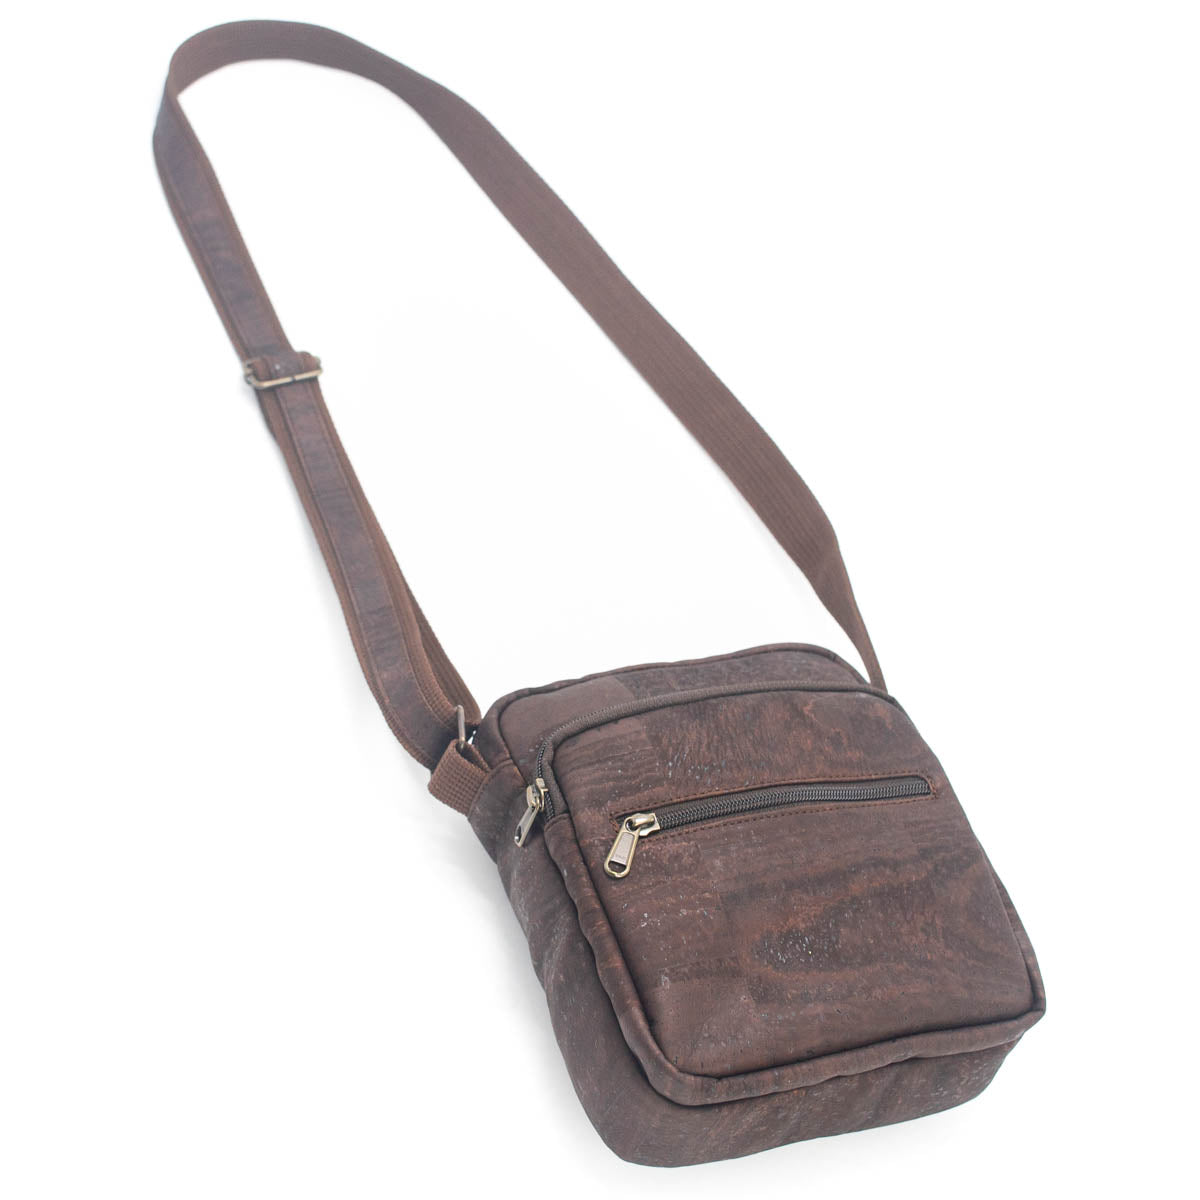 Solid Color Cork Men's Crossbody Bag | THE CORK COLLECTION